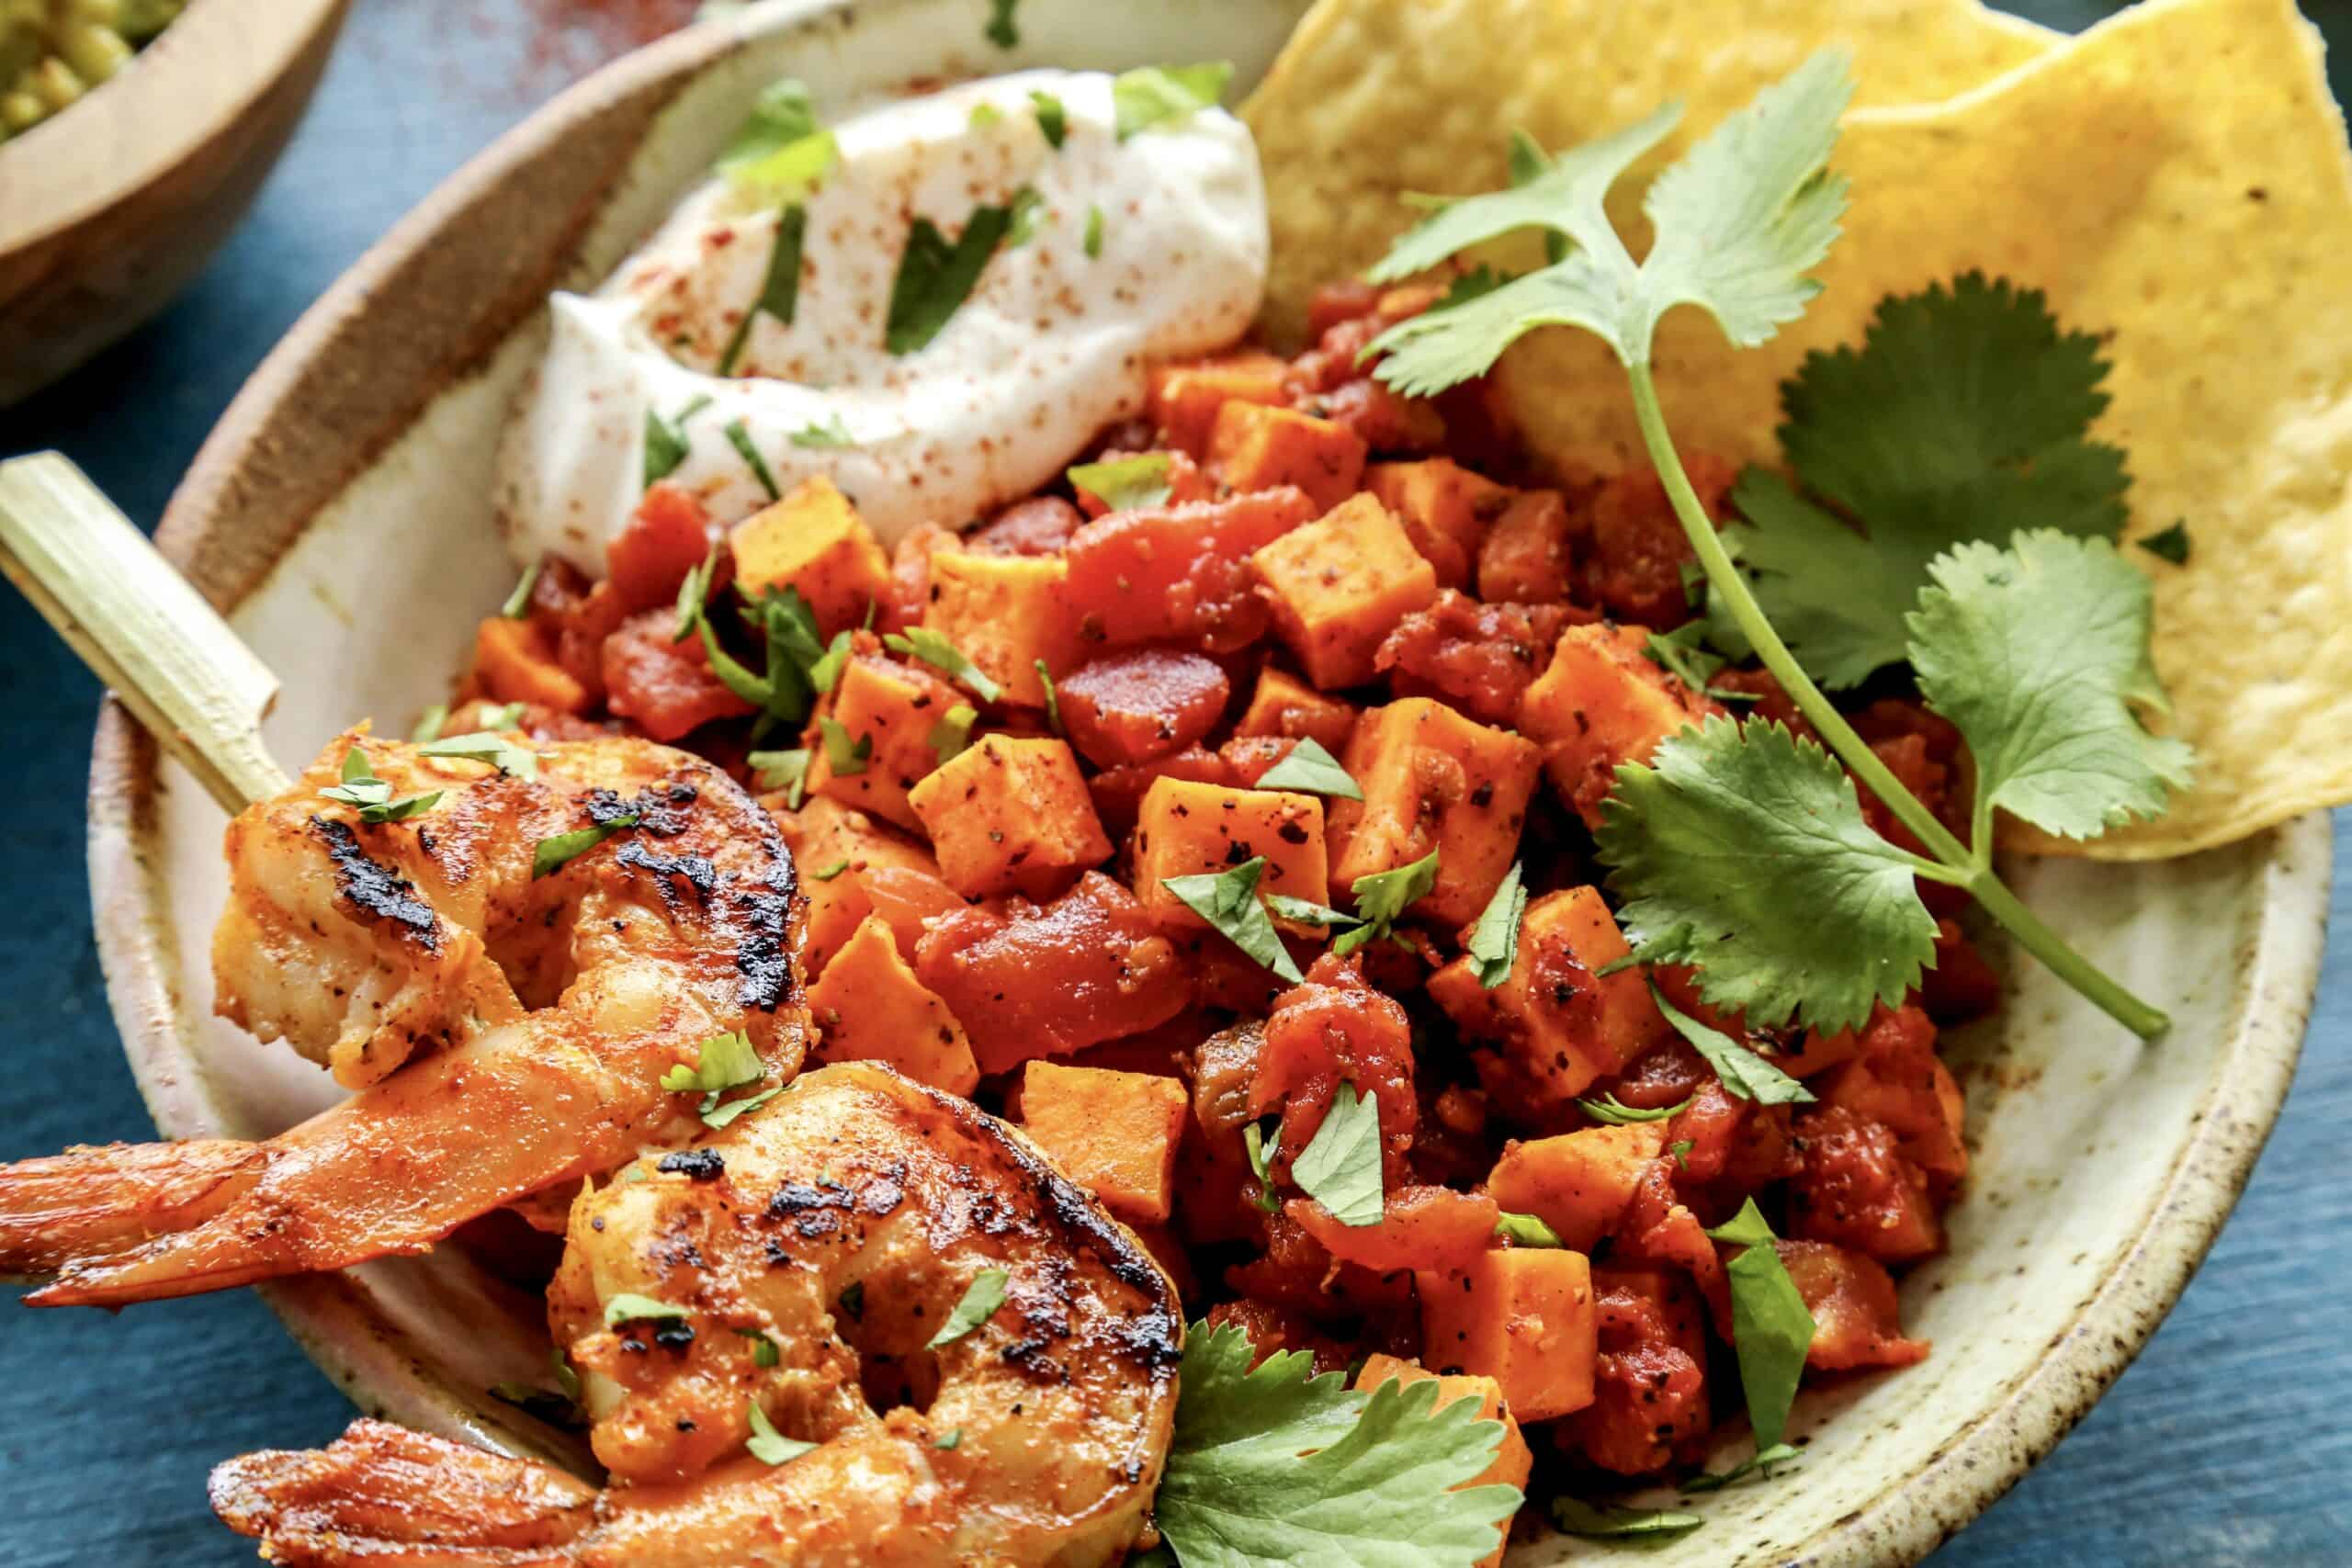 a pottery bowl of diced sweet potatoes and tomatoes, plus a small skewer of grilled shrimp